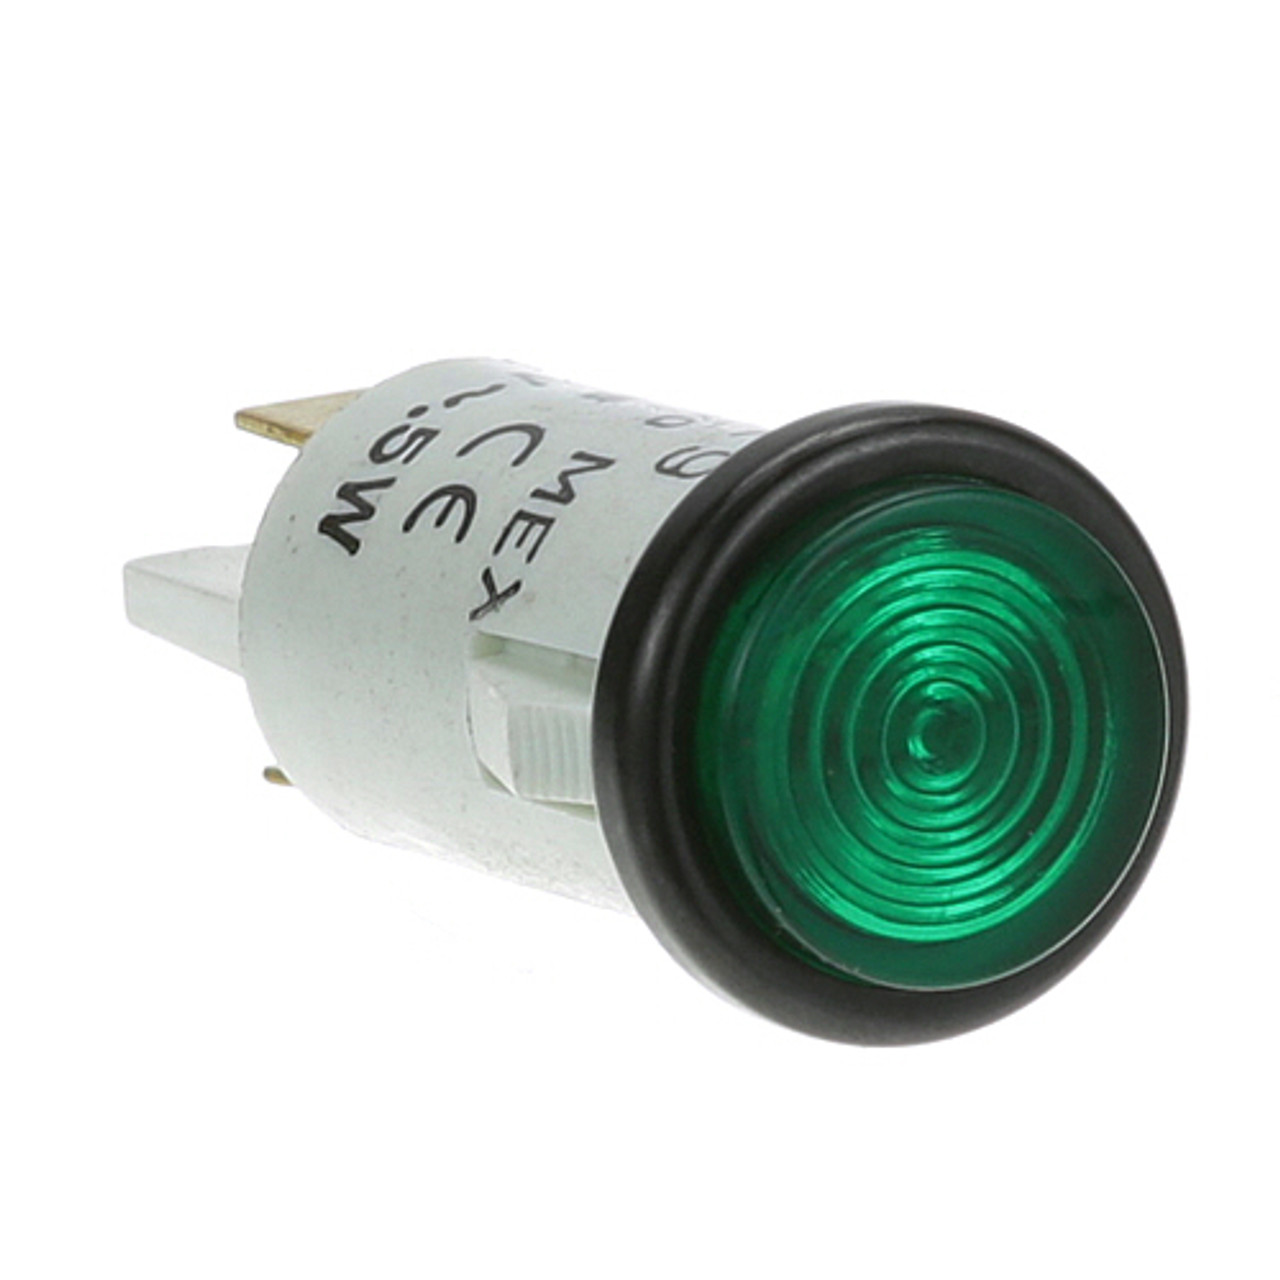 Signal Light 1/2" Green 250V - Replacement Part For Hatco 2.19.150